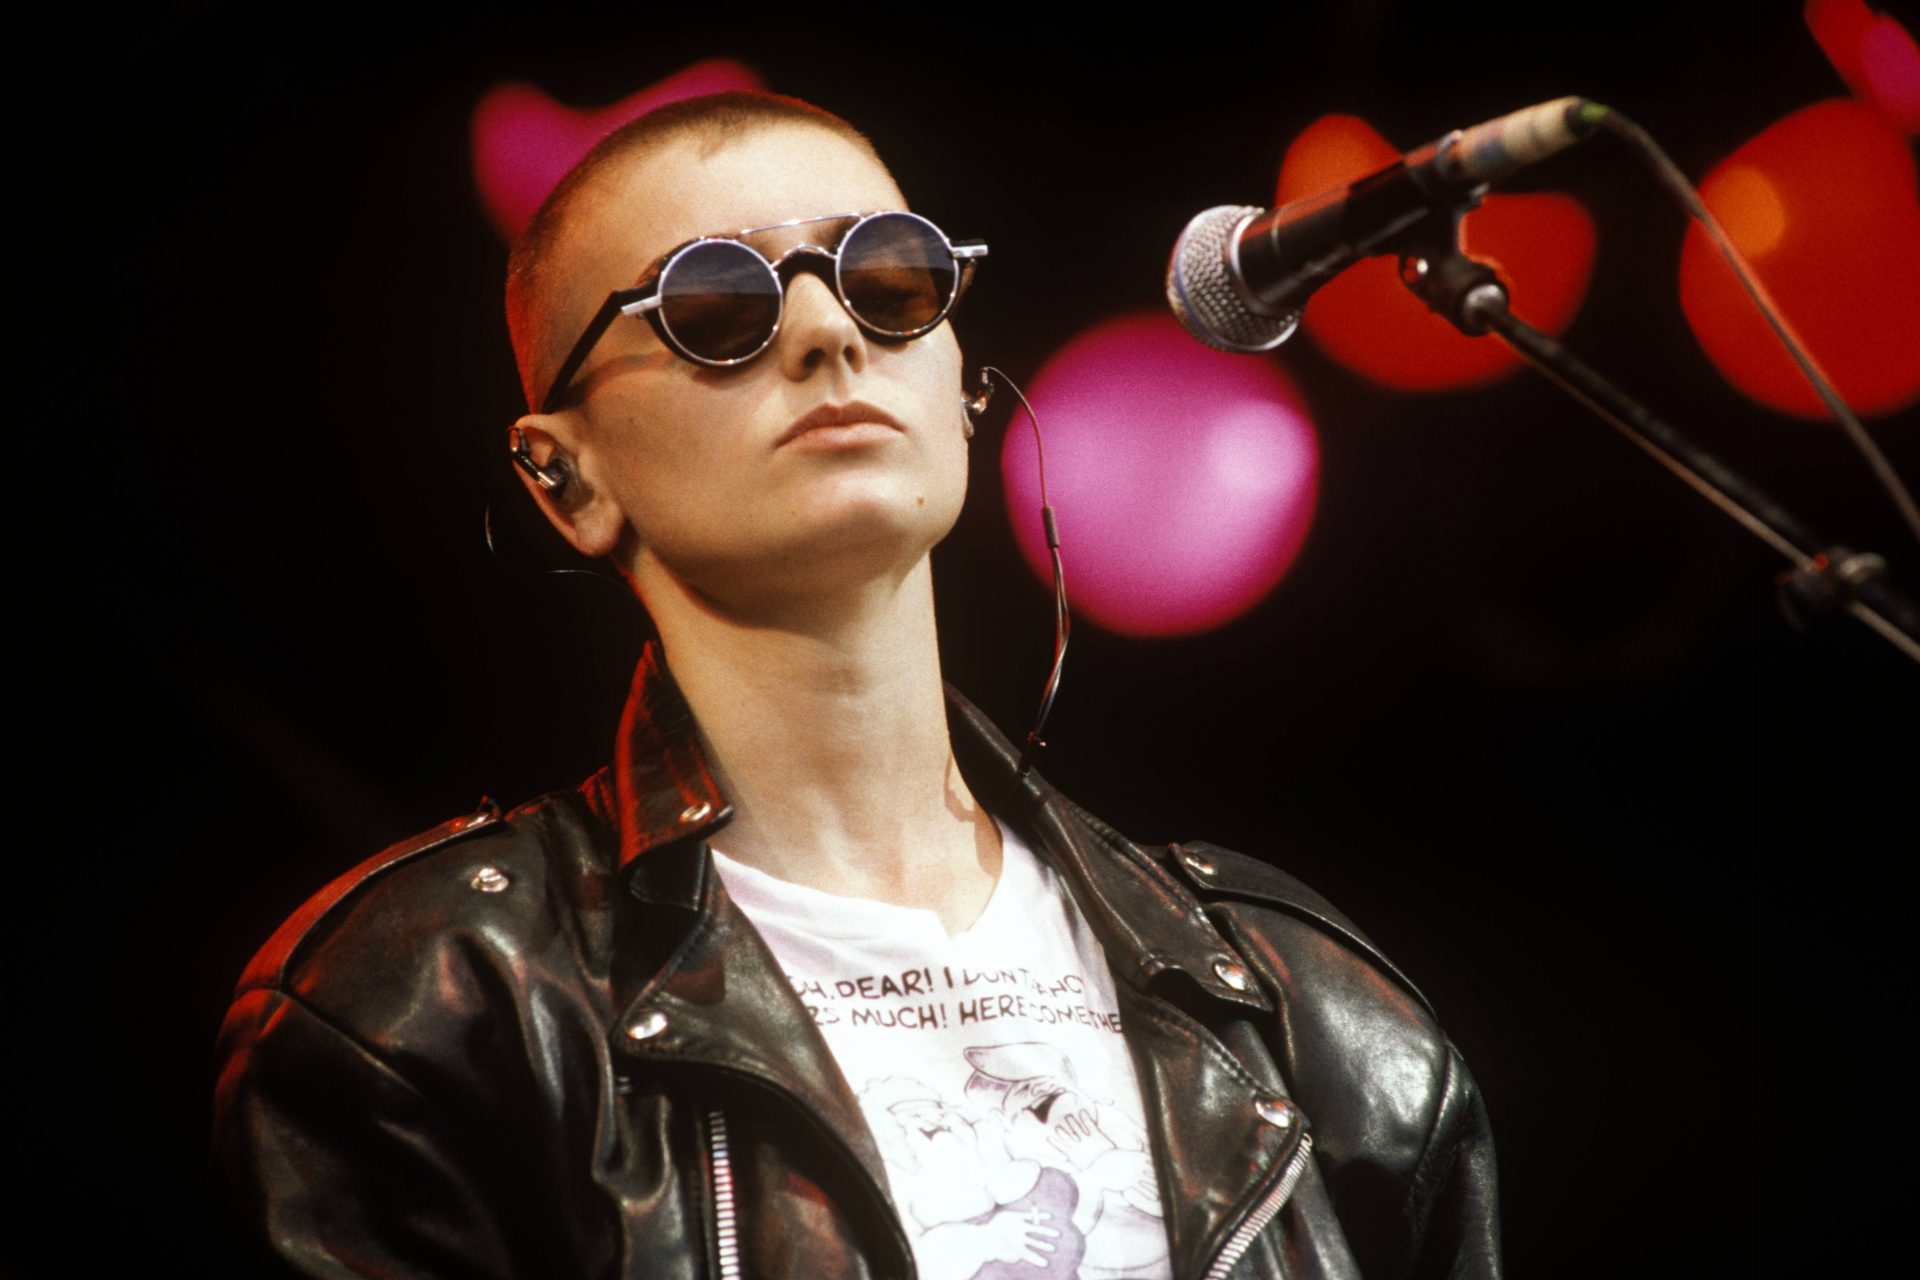 Sinéad O'Connor's discography